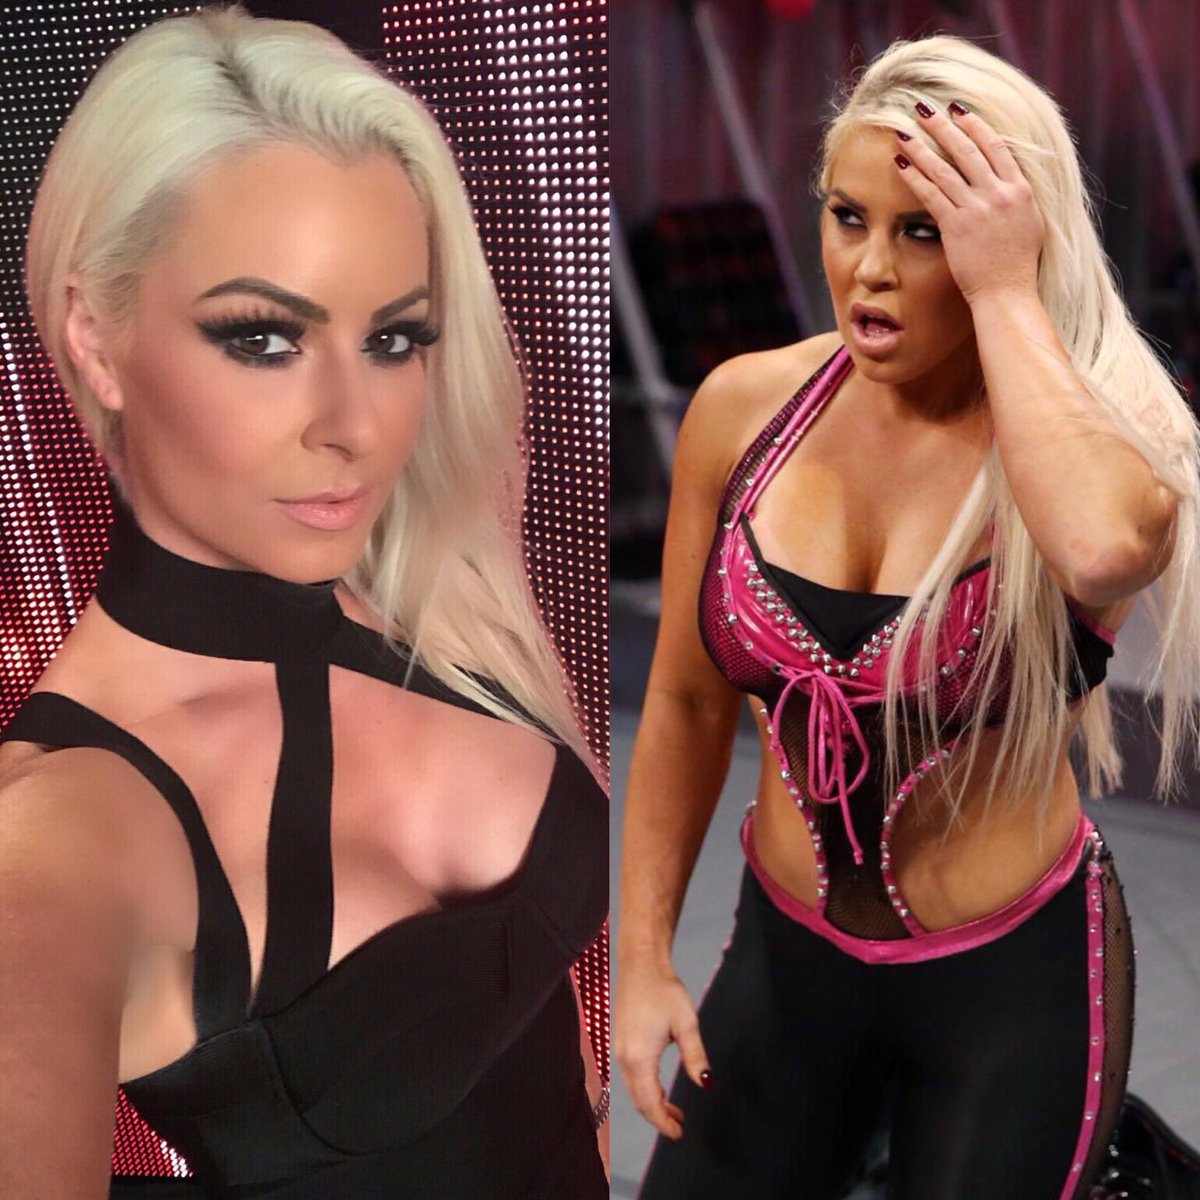 Who's hotter?RT for Maryse Like for Dana Brooke. 